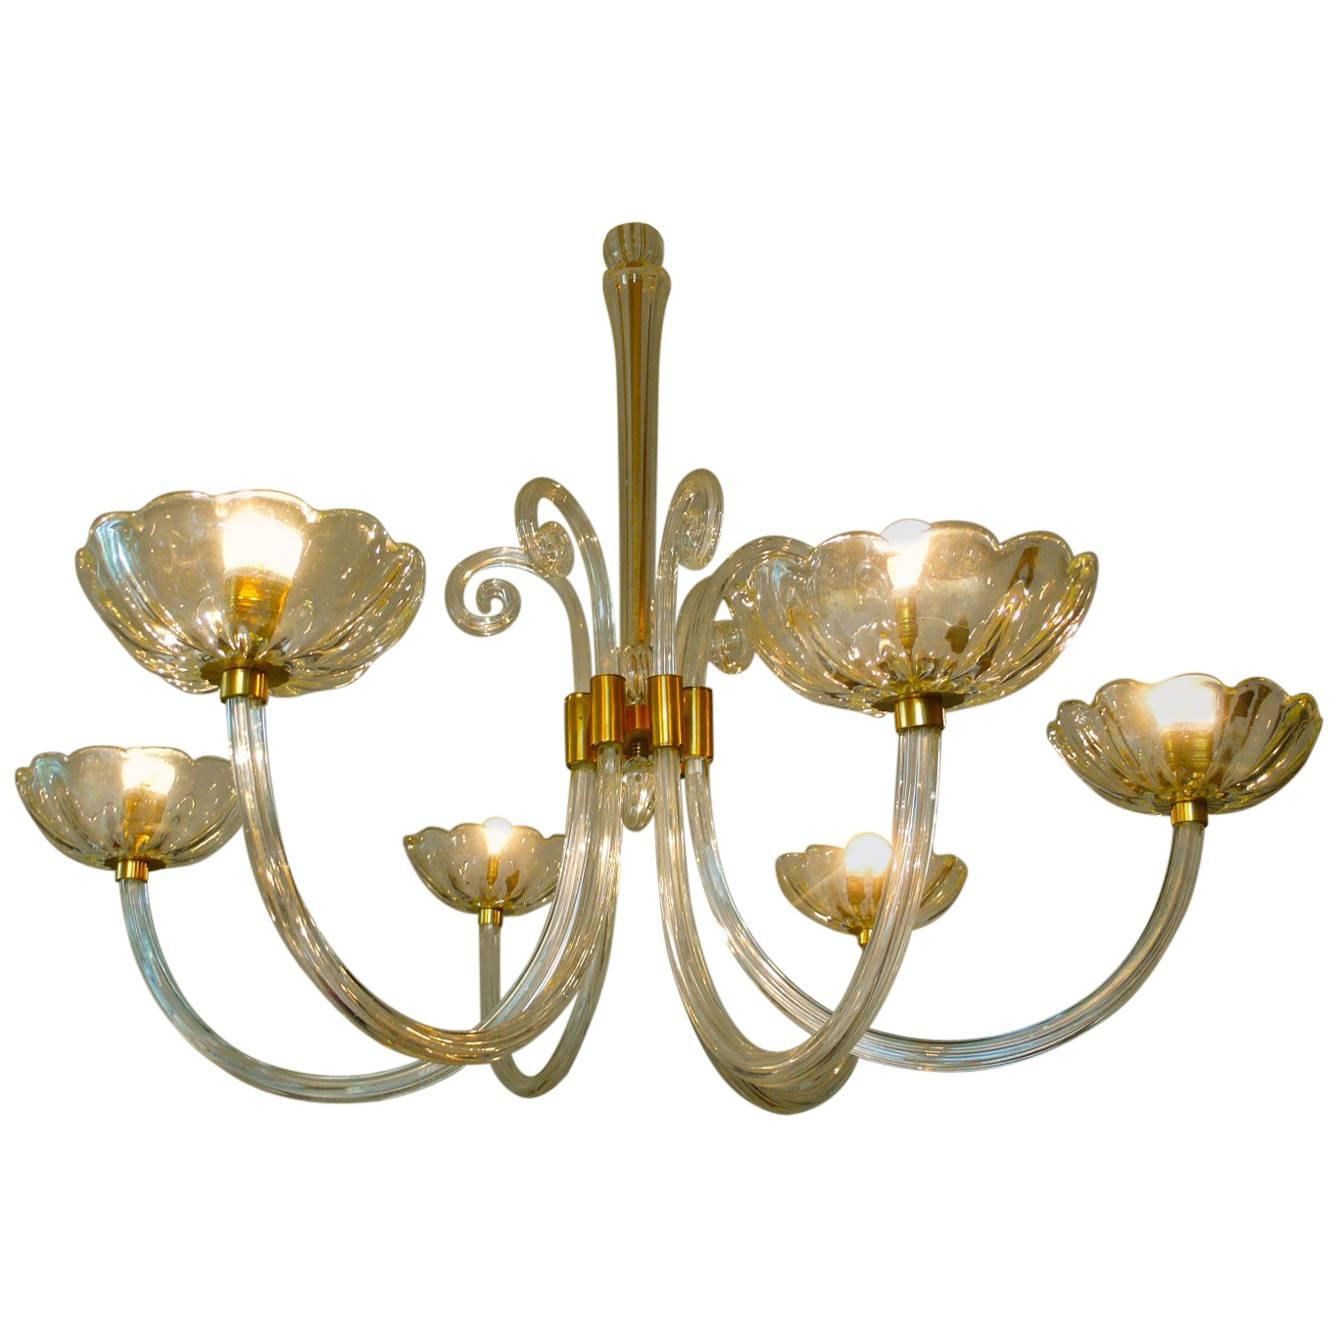 Amazing and elegant handblown Murano chandelier by Ercole Barovier, circa 1940.
Measure: Diameter cm 120
Height cm 215
From Private collection.